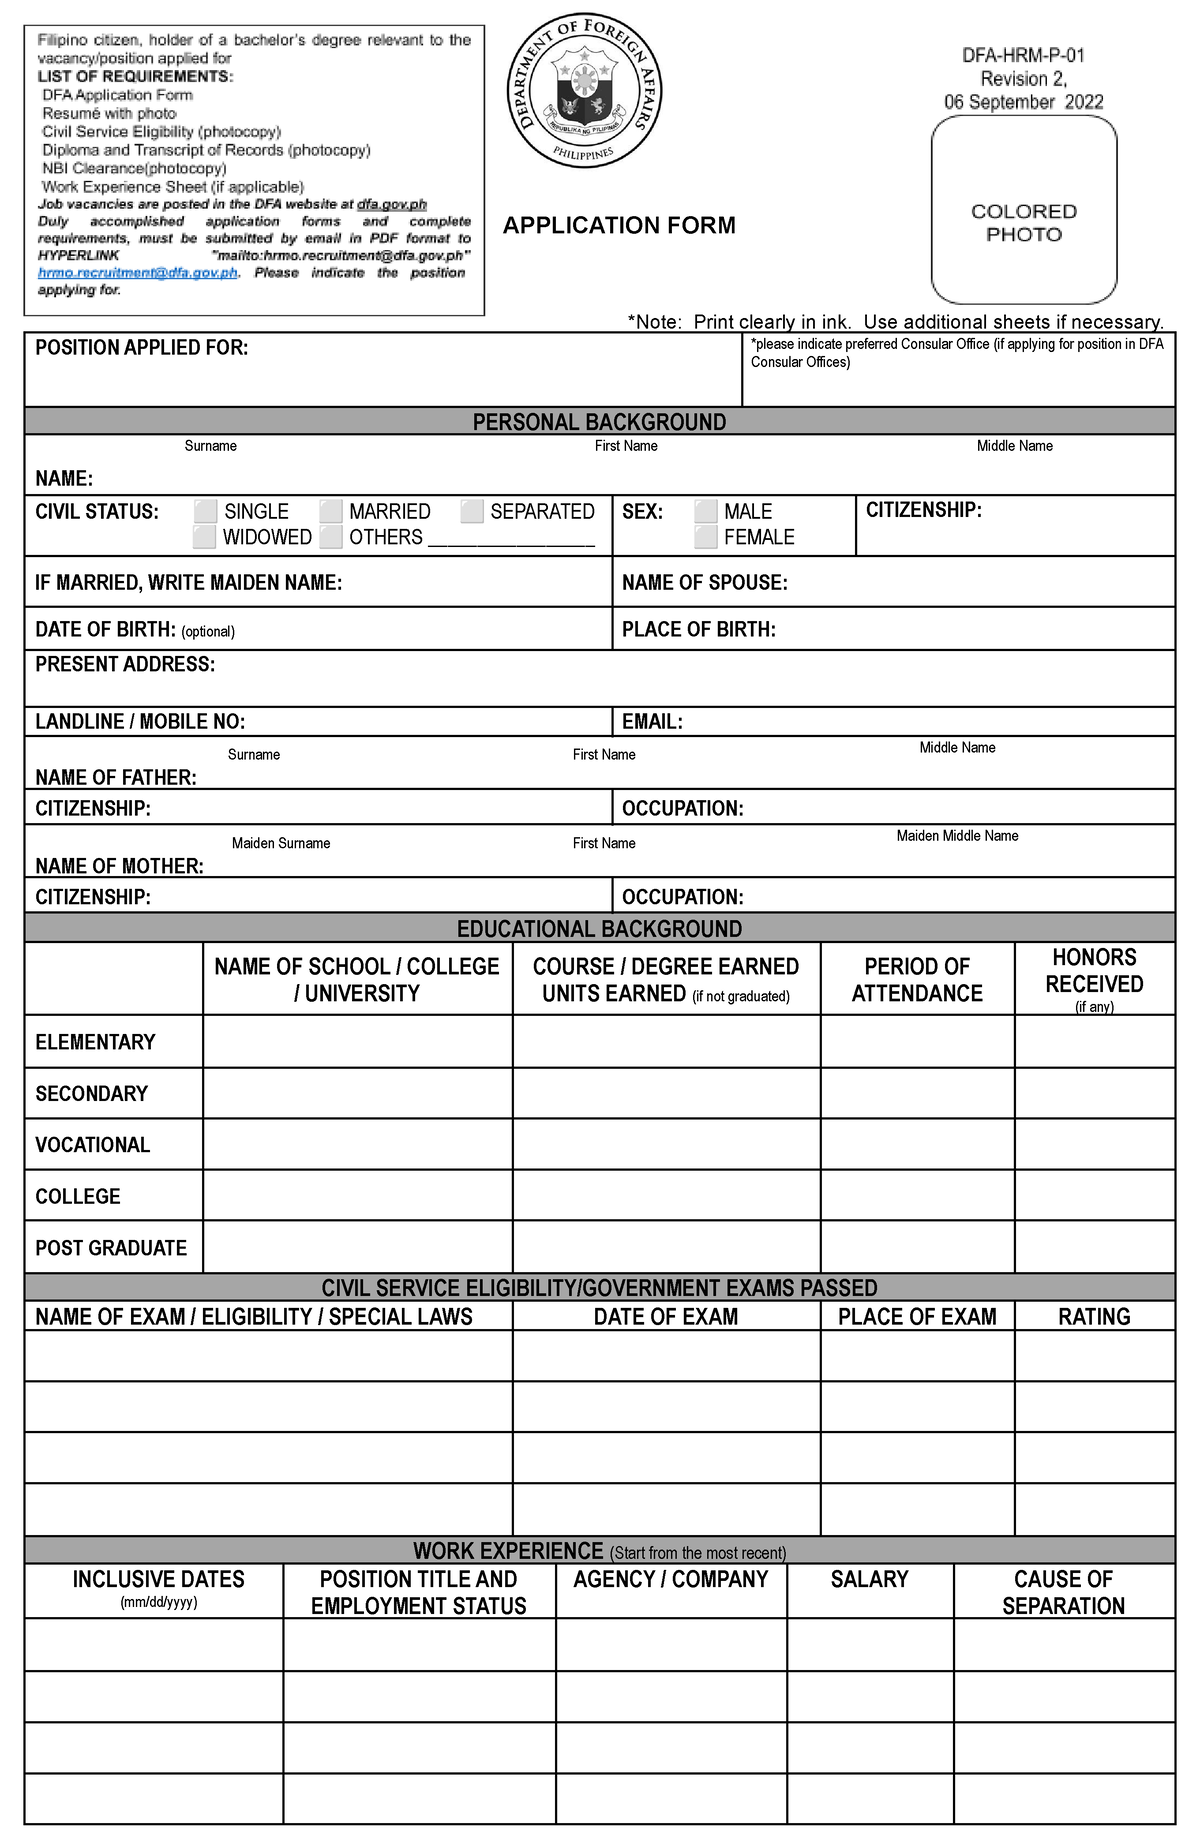 Dfa Application Form Revision 02 Application Form Note Print Clearly In Ink Use Additional 6973